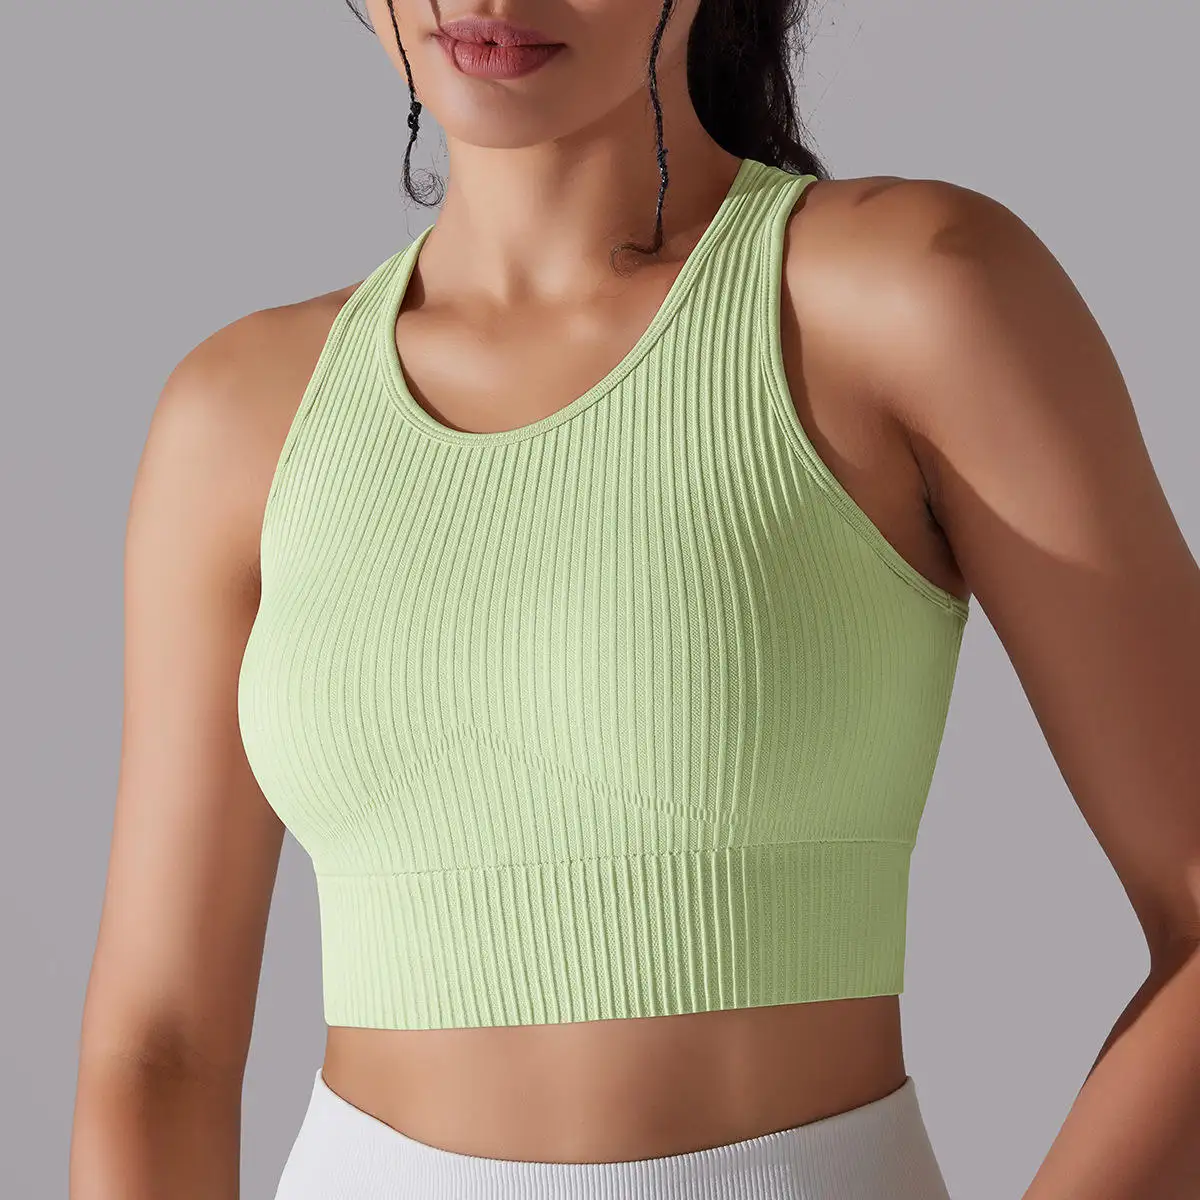 Wholesale Seamless Solid Color Workout Tank Top Cropped Plain Sports Shirts for Women Yoga Tops